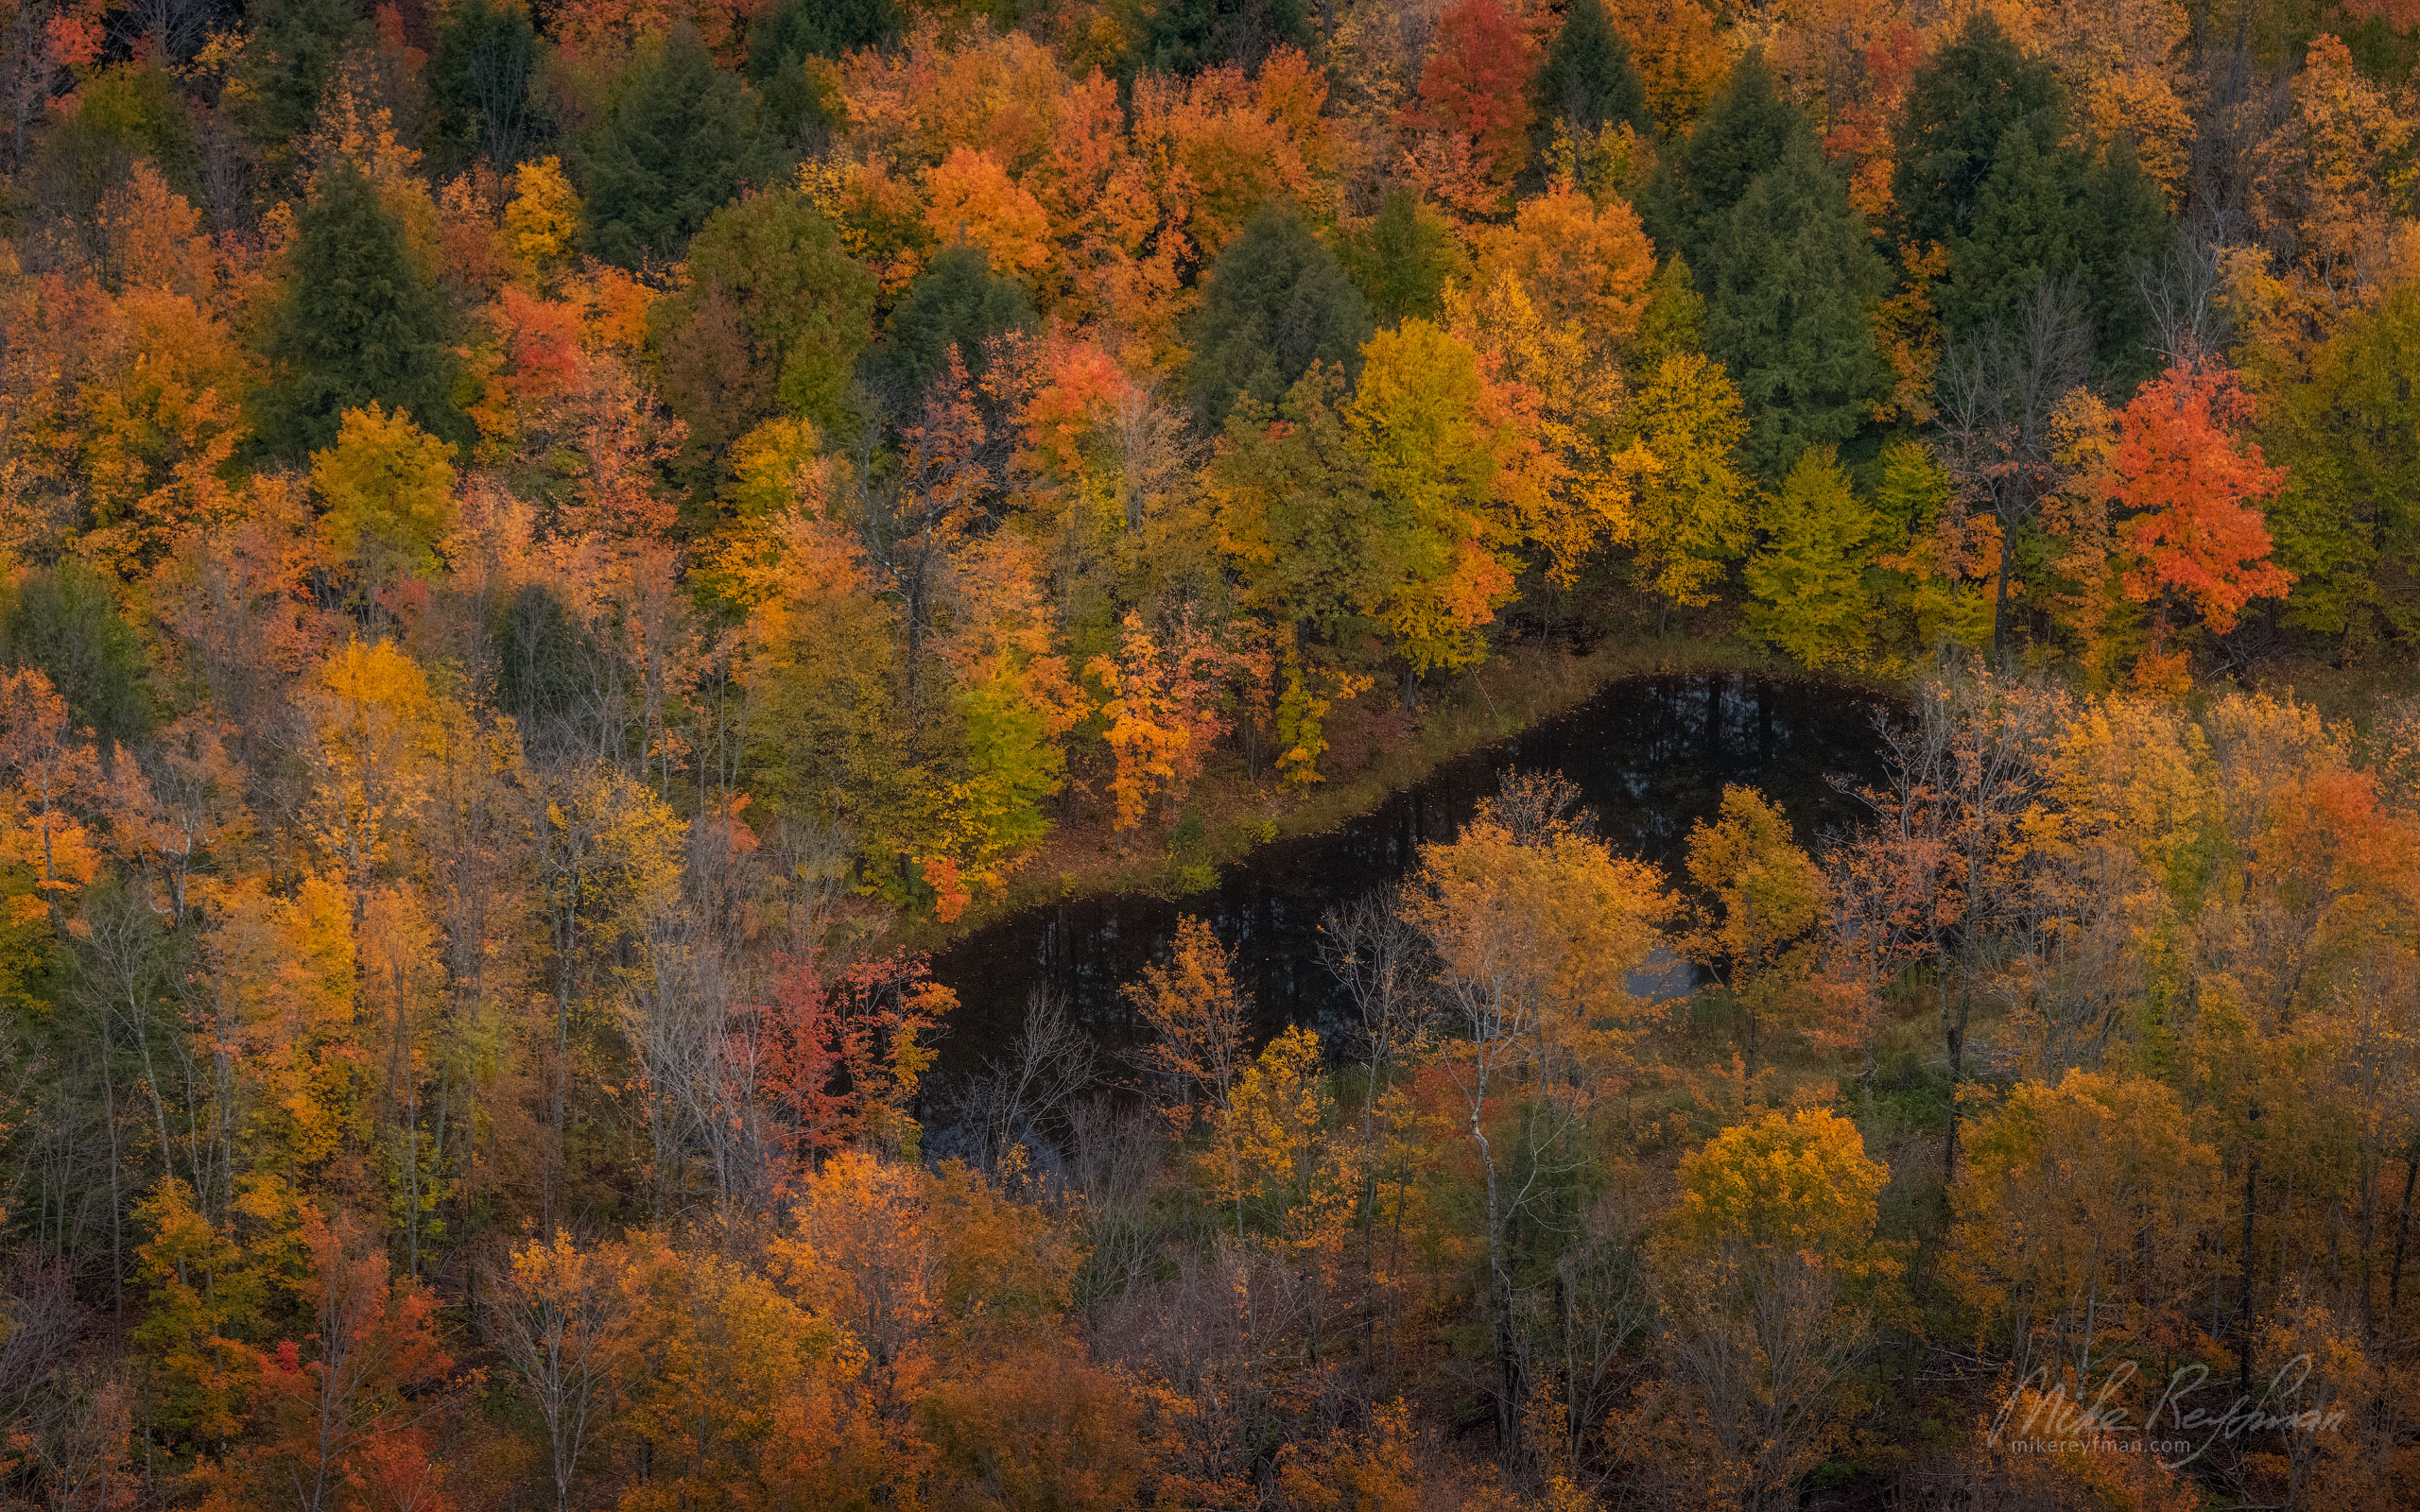 Bird-eye view from the top of Copper Peak Ski Jump. Ottava National Forest, Upper Peninsula, Michigan, USA UP-MI_092_50E3257.jpg - Michigan's Upper Peninsula - the best destination in US for fall colors. - Mike Reyfman Photography